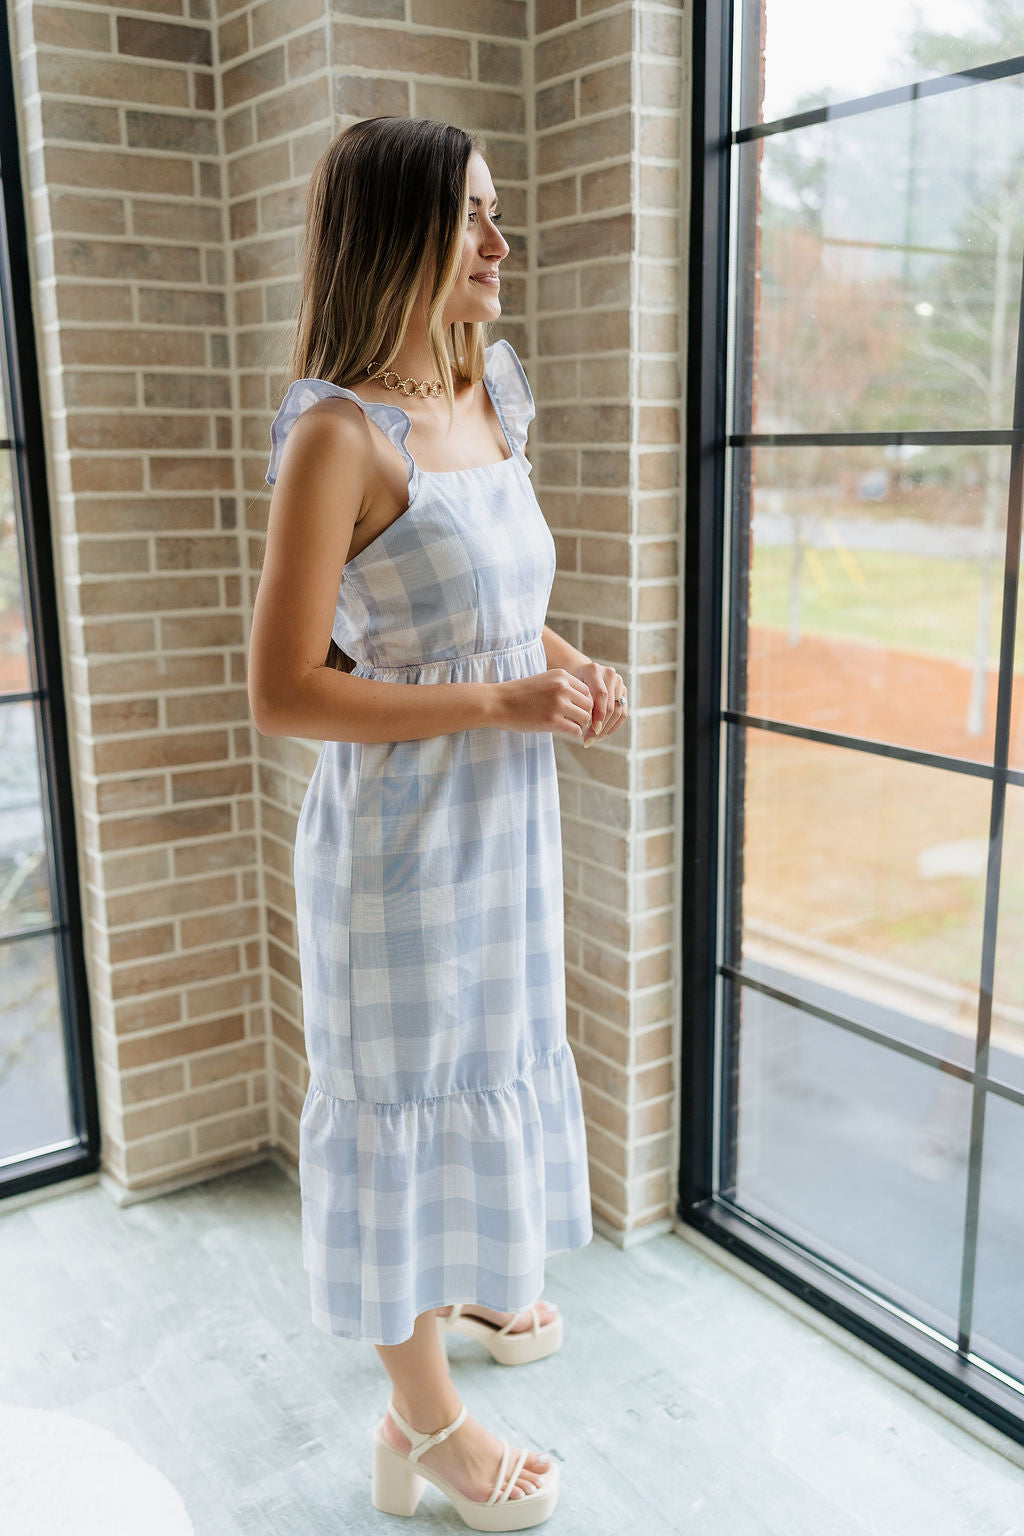 Full body side view of female model wearing the Bonnie Light Blue and White Plaid Midi Dress which features Light Blue and White Plaid Design Midi Length, White Lining, Tiered Ruffle Hem, Square Neckline with Ruffle Straps and Sleeveless.